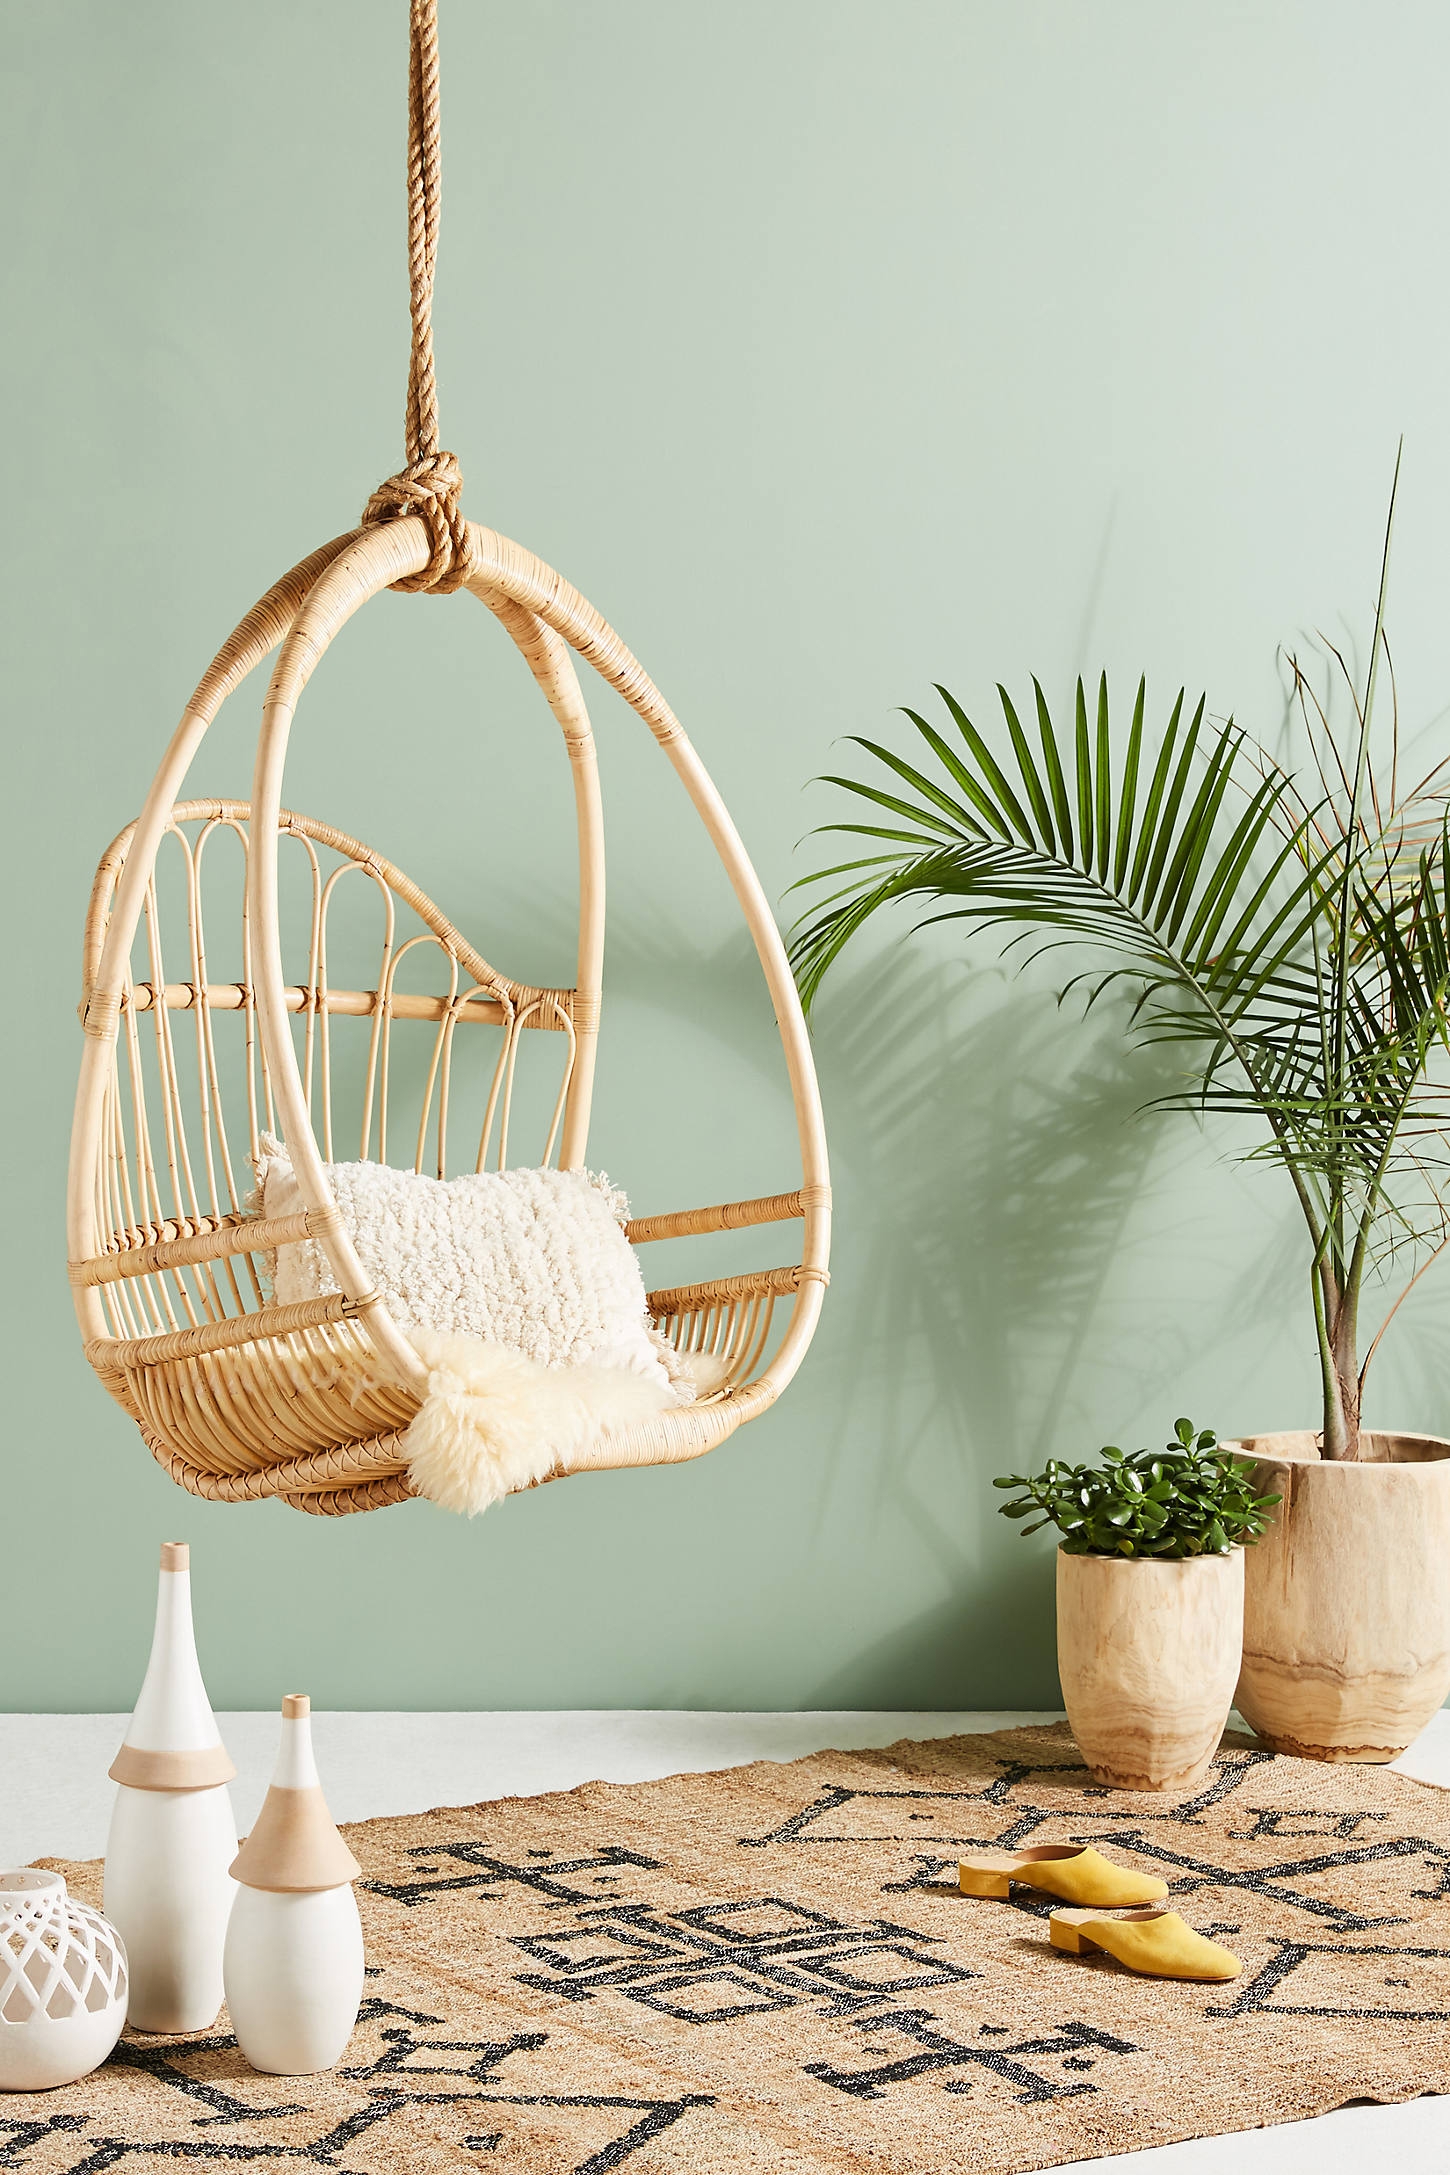 Woven Hanging Chair - Image 2